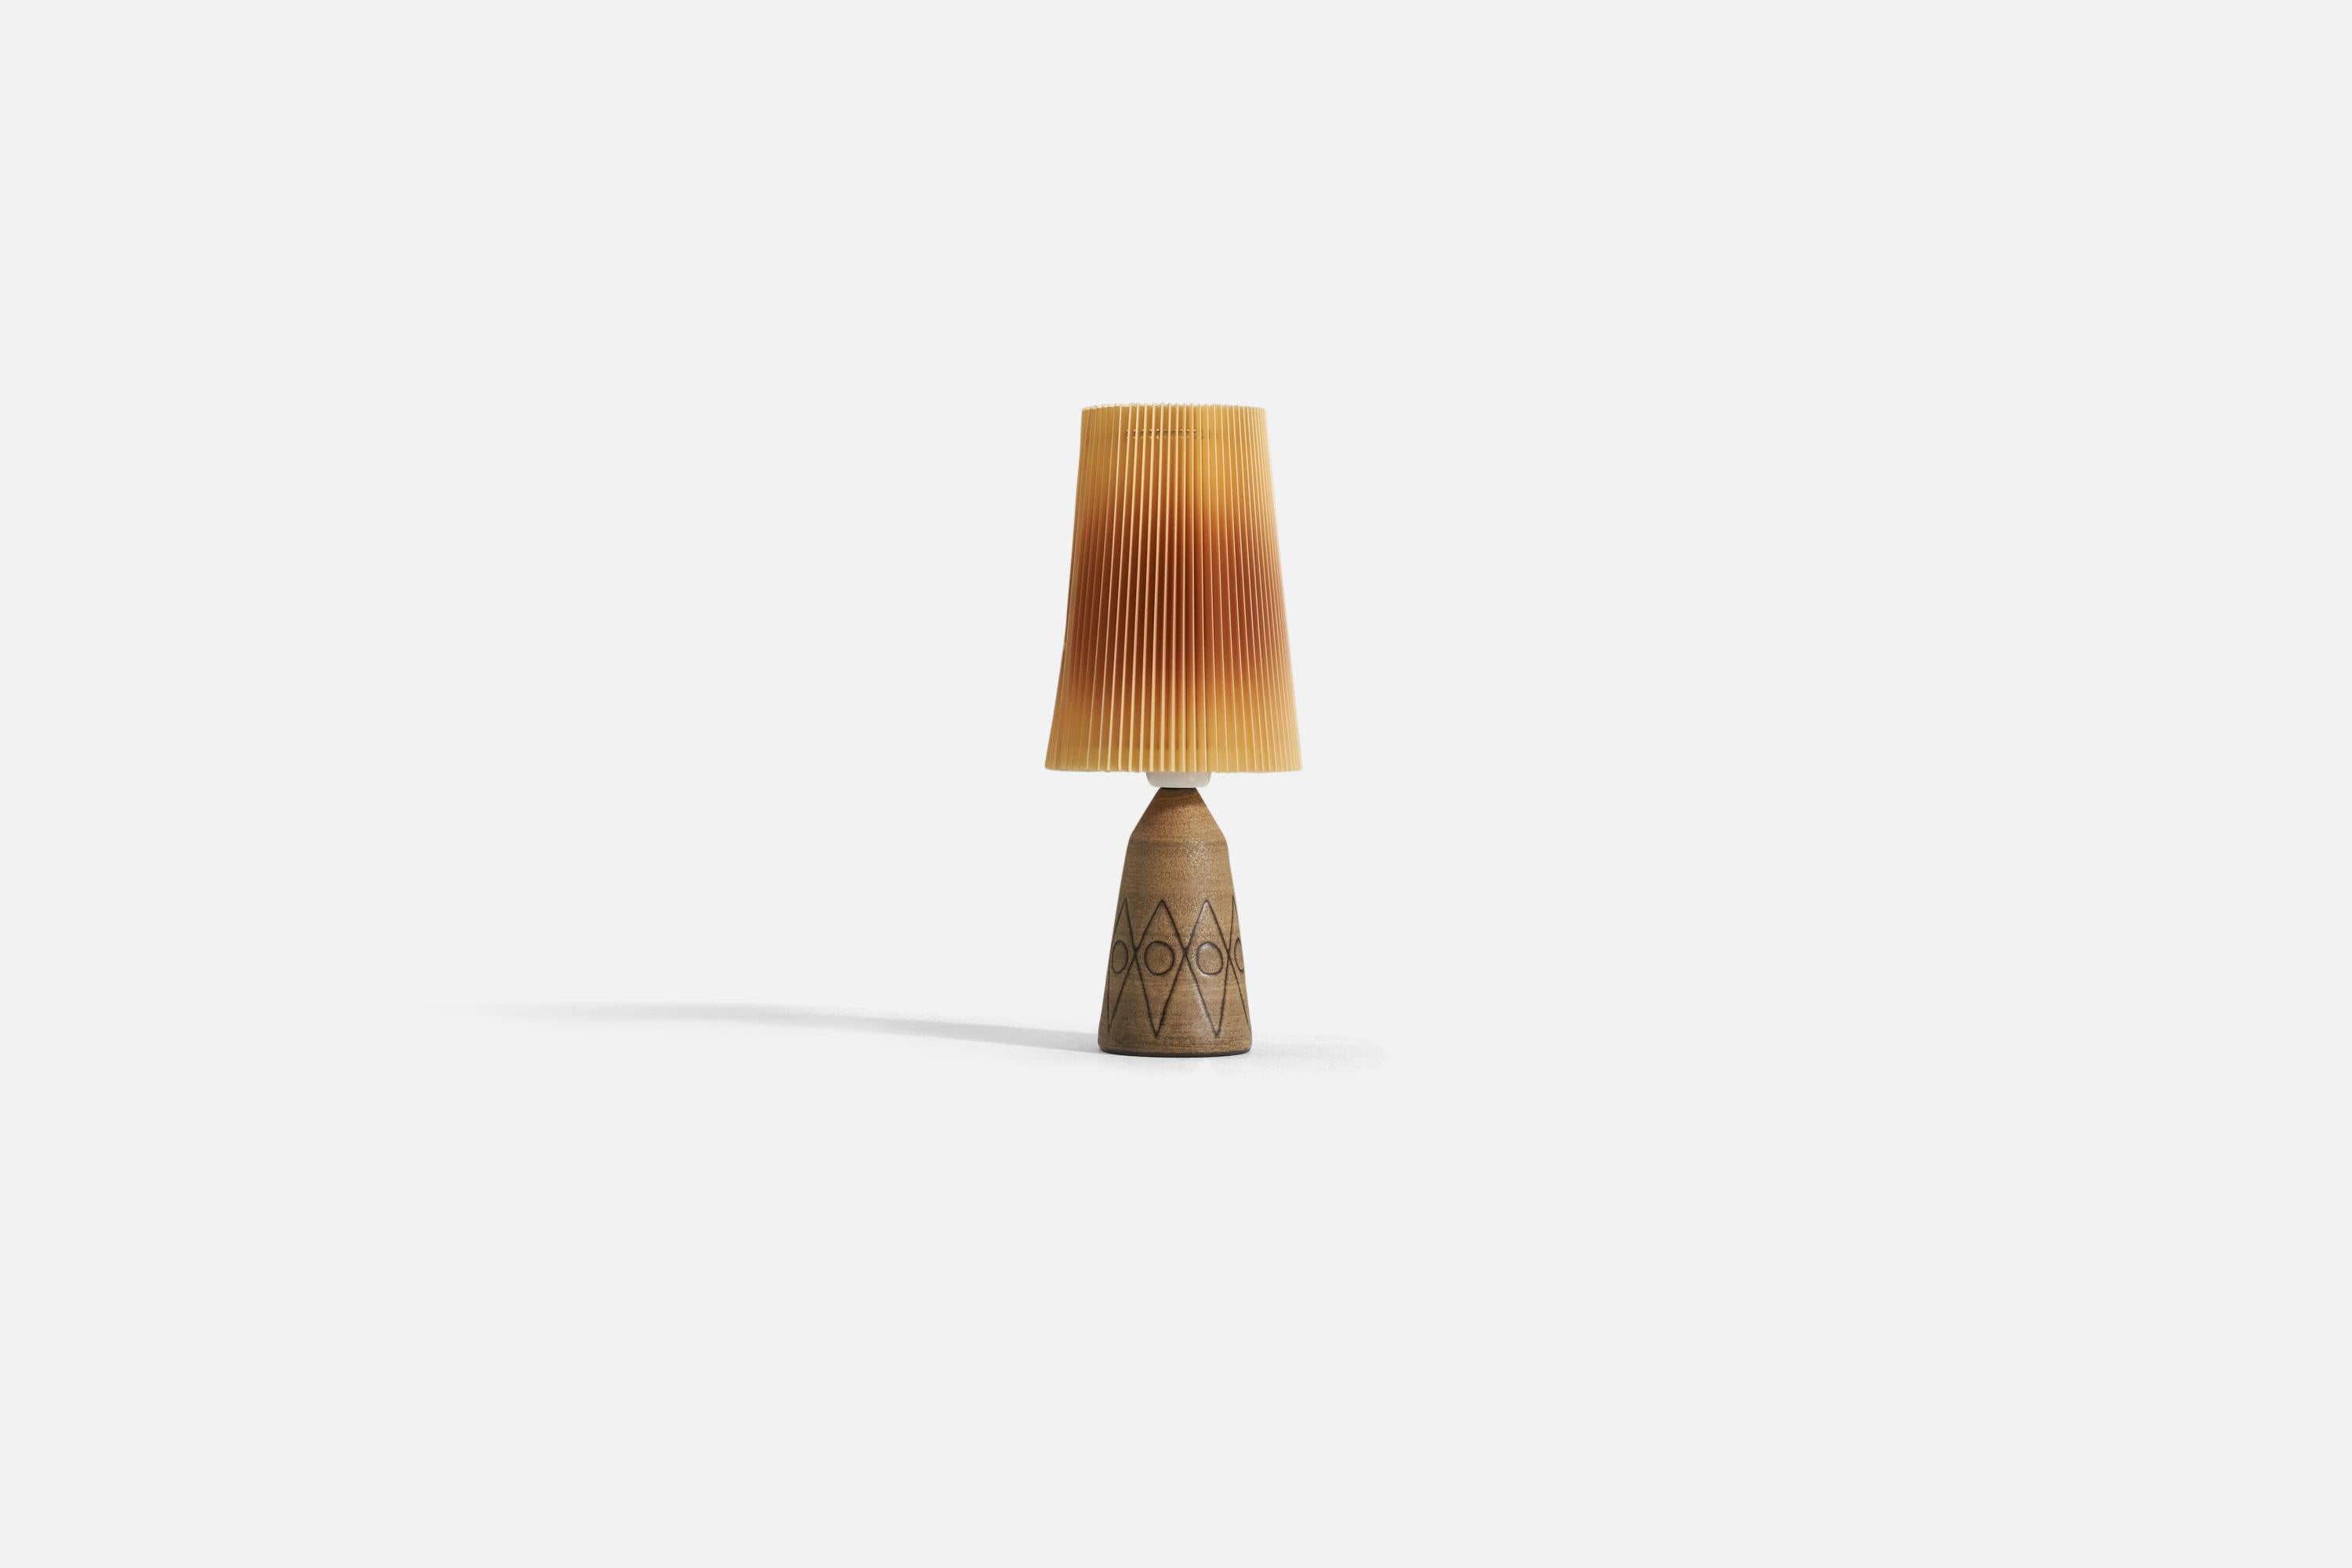 A brown incised ceramic table lamp, designed and produced in Sweden, c. 1960s. 

Sold with illustrated lampshade. Measurements listed include lampshade.